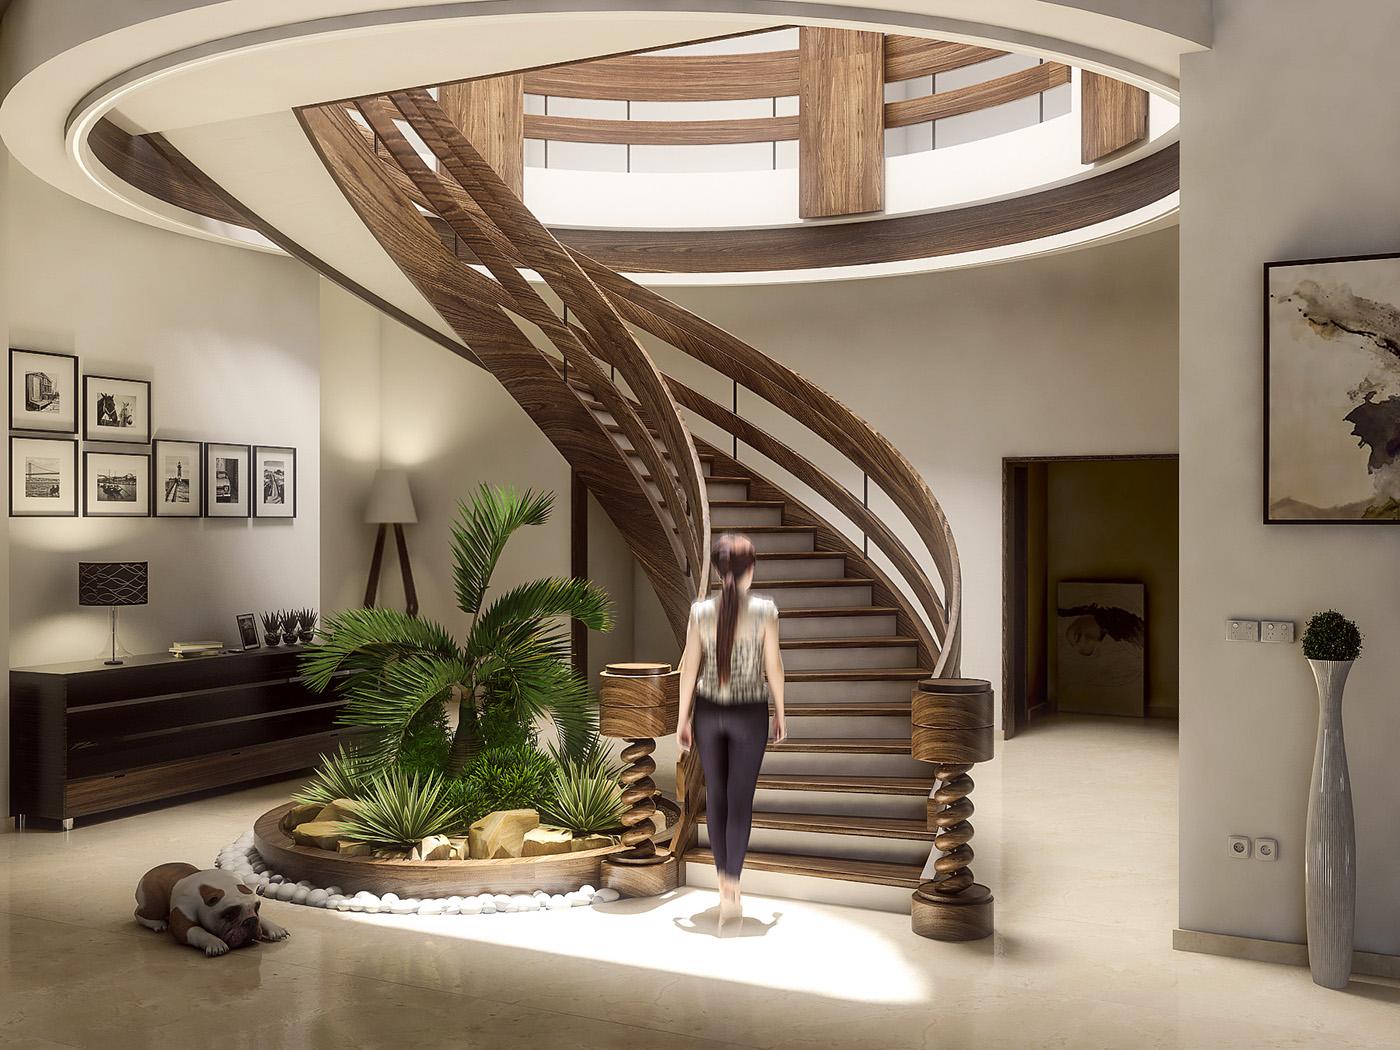 spiral staircase design, plants, classic interiors